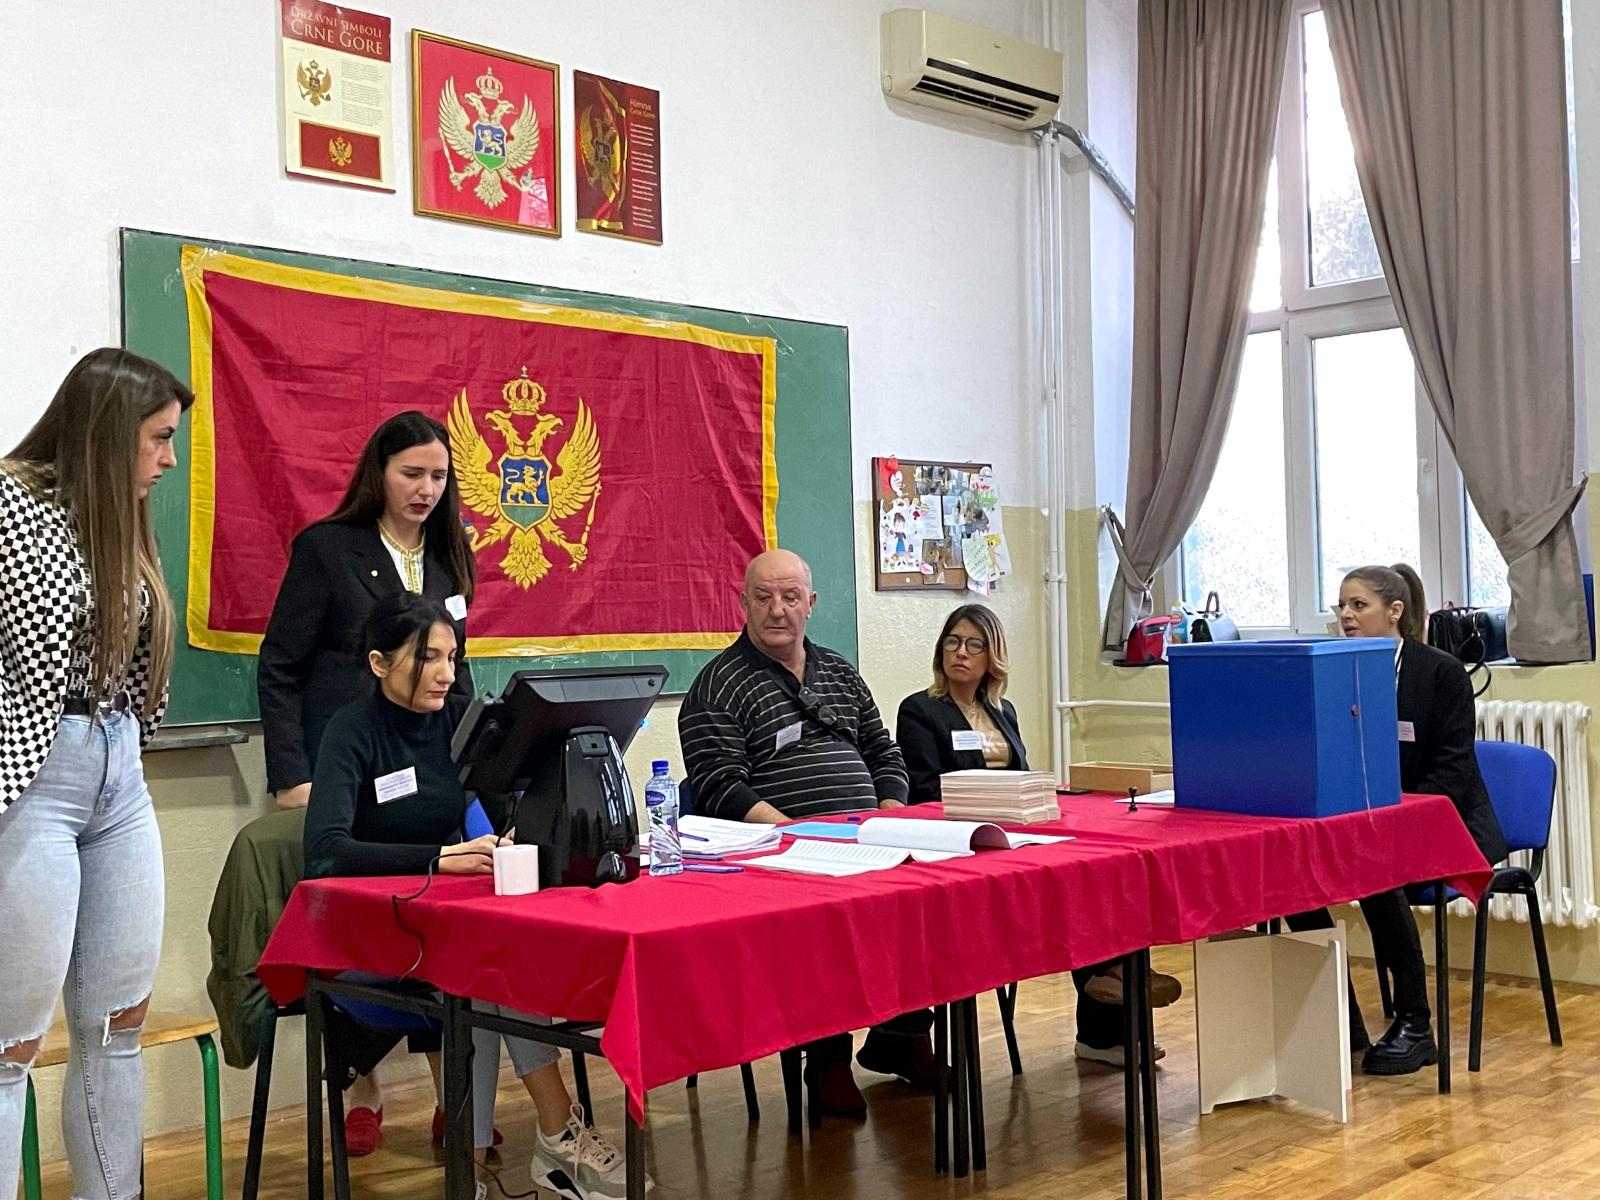 Four people sit at a red table, while two people stand behind the table. A Montenegro flag is hanging up on the wall behind them.